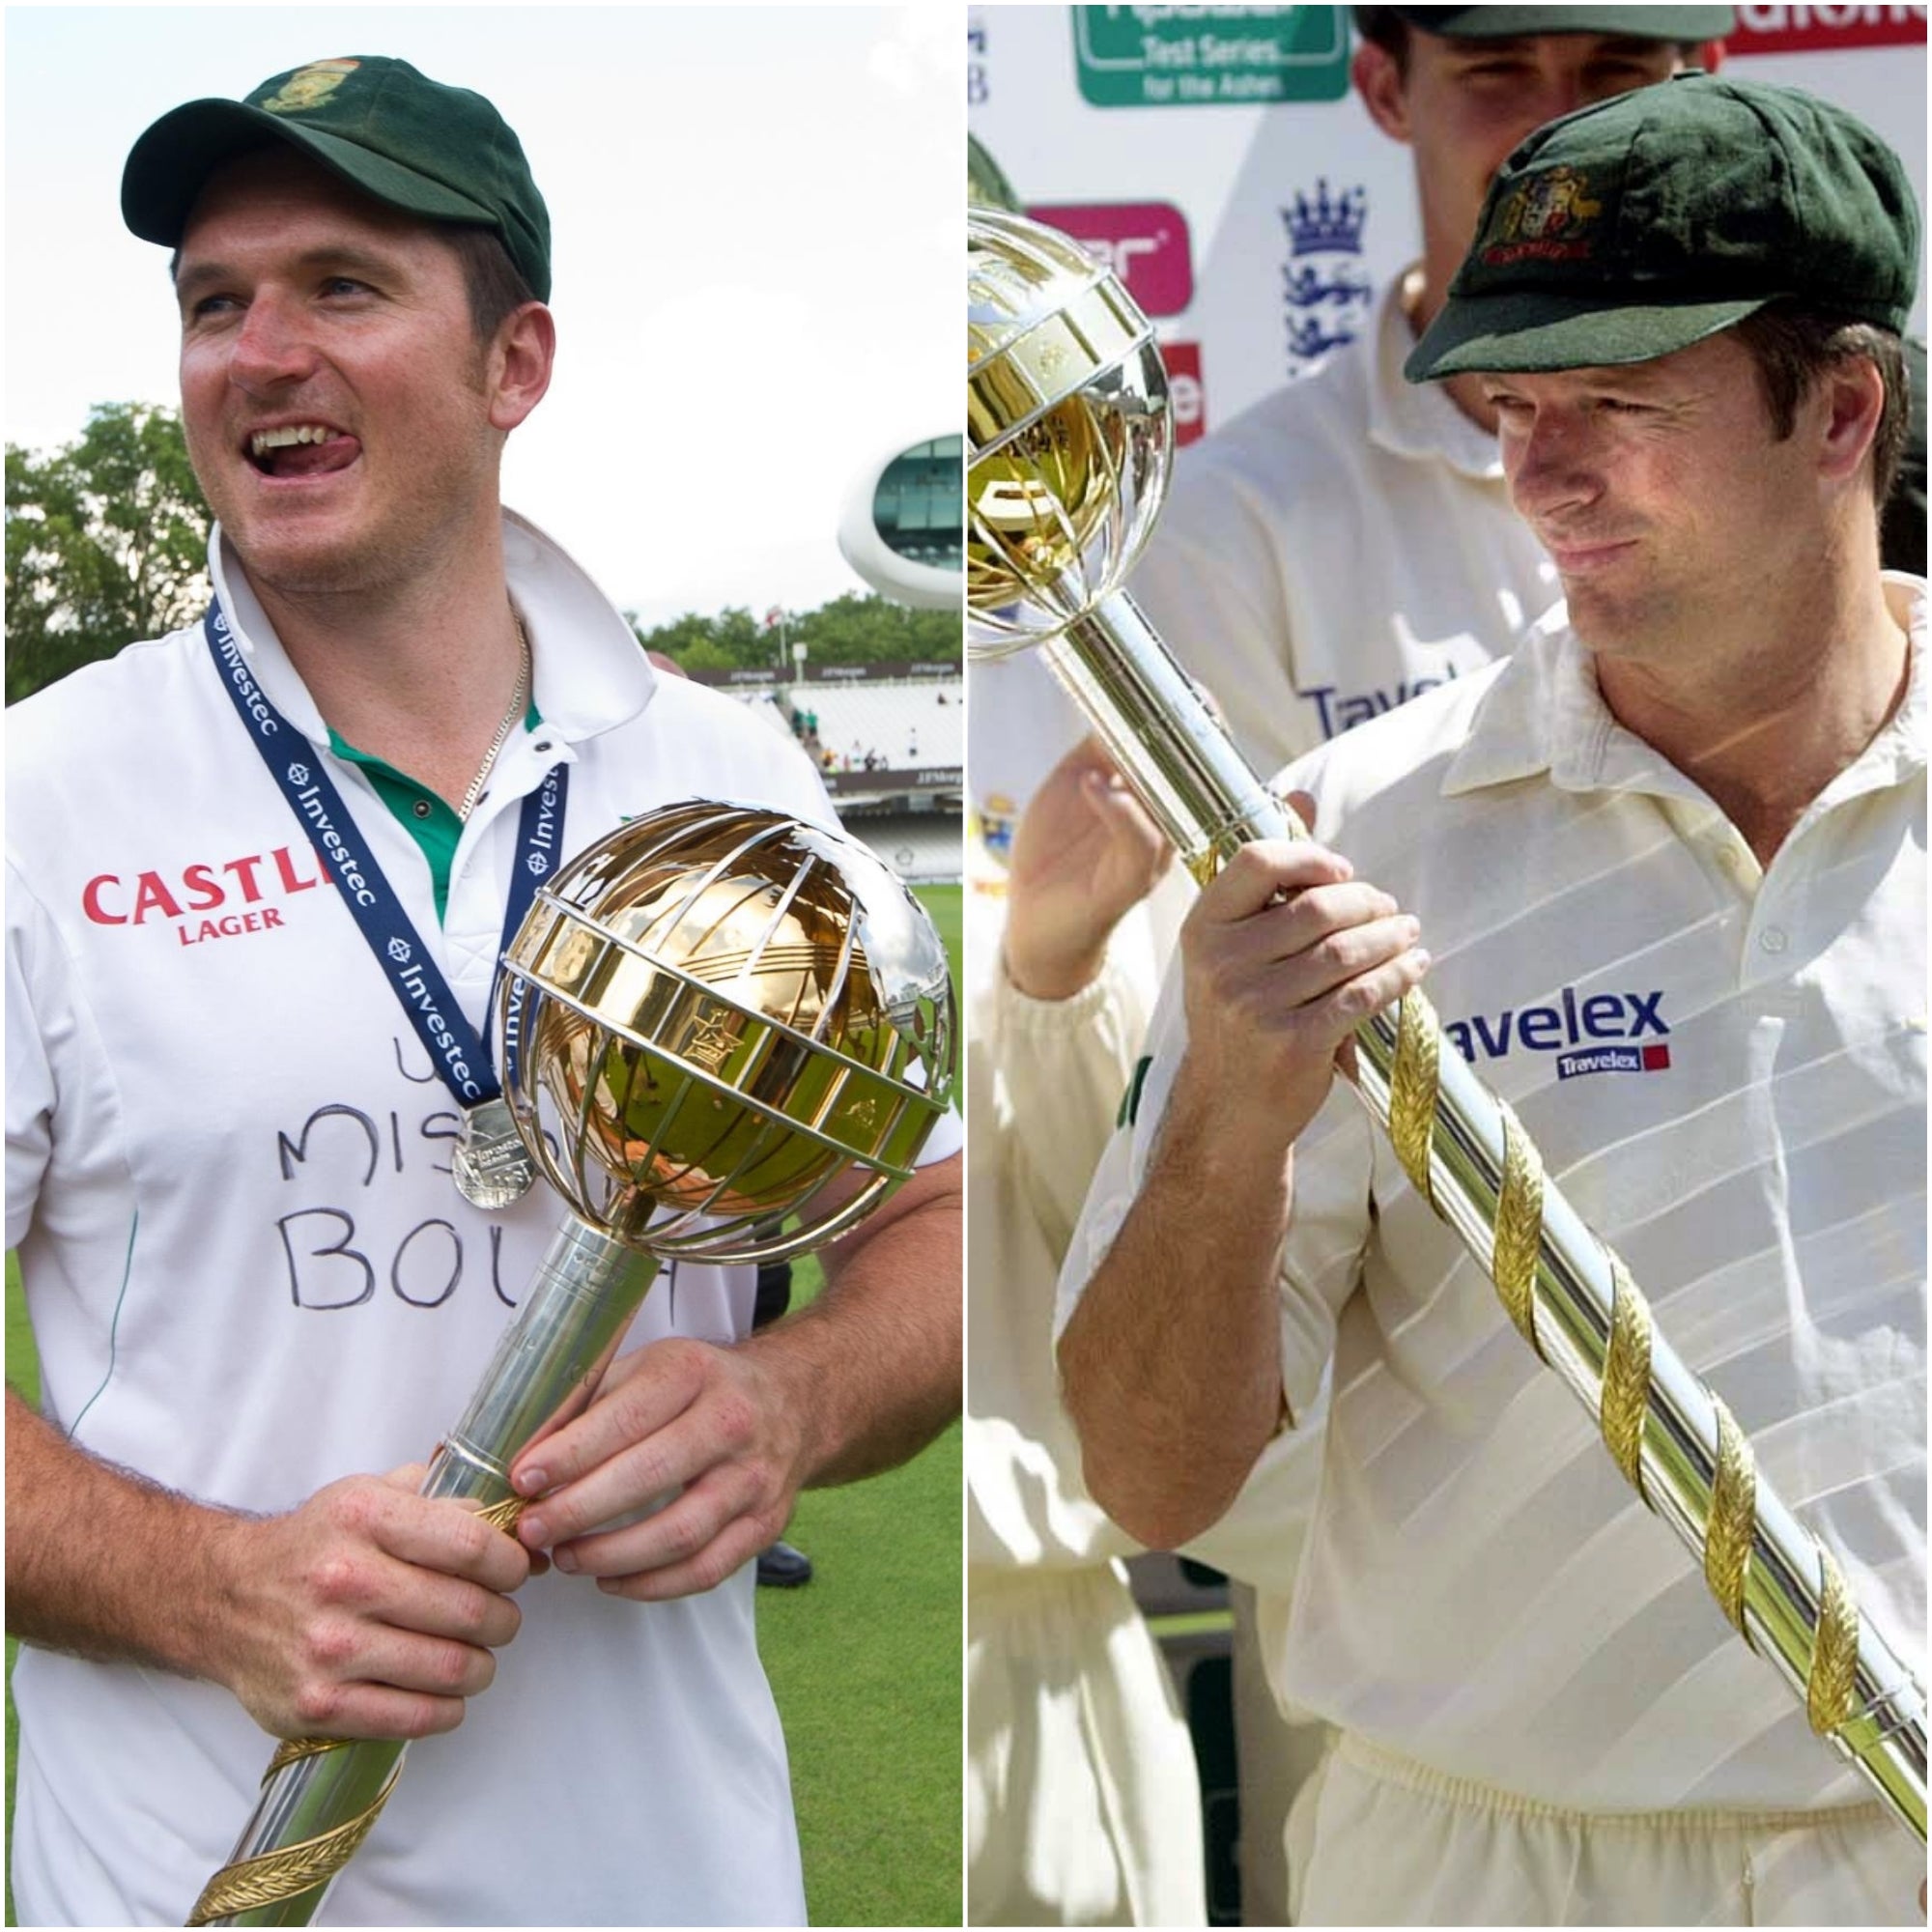 Graeme Smith, left, holds the record for most Tests as captain while Steve Waugh, right, has the best win percentage of the top 10 (Tom Hervezi/David Jones/PA)